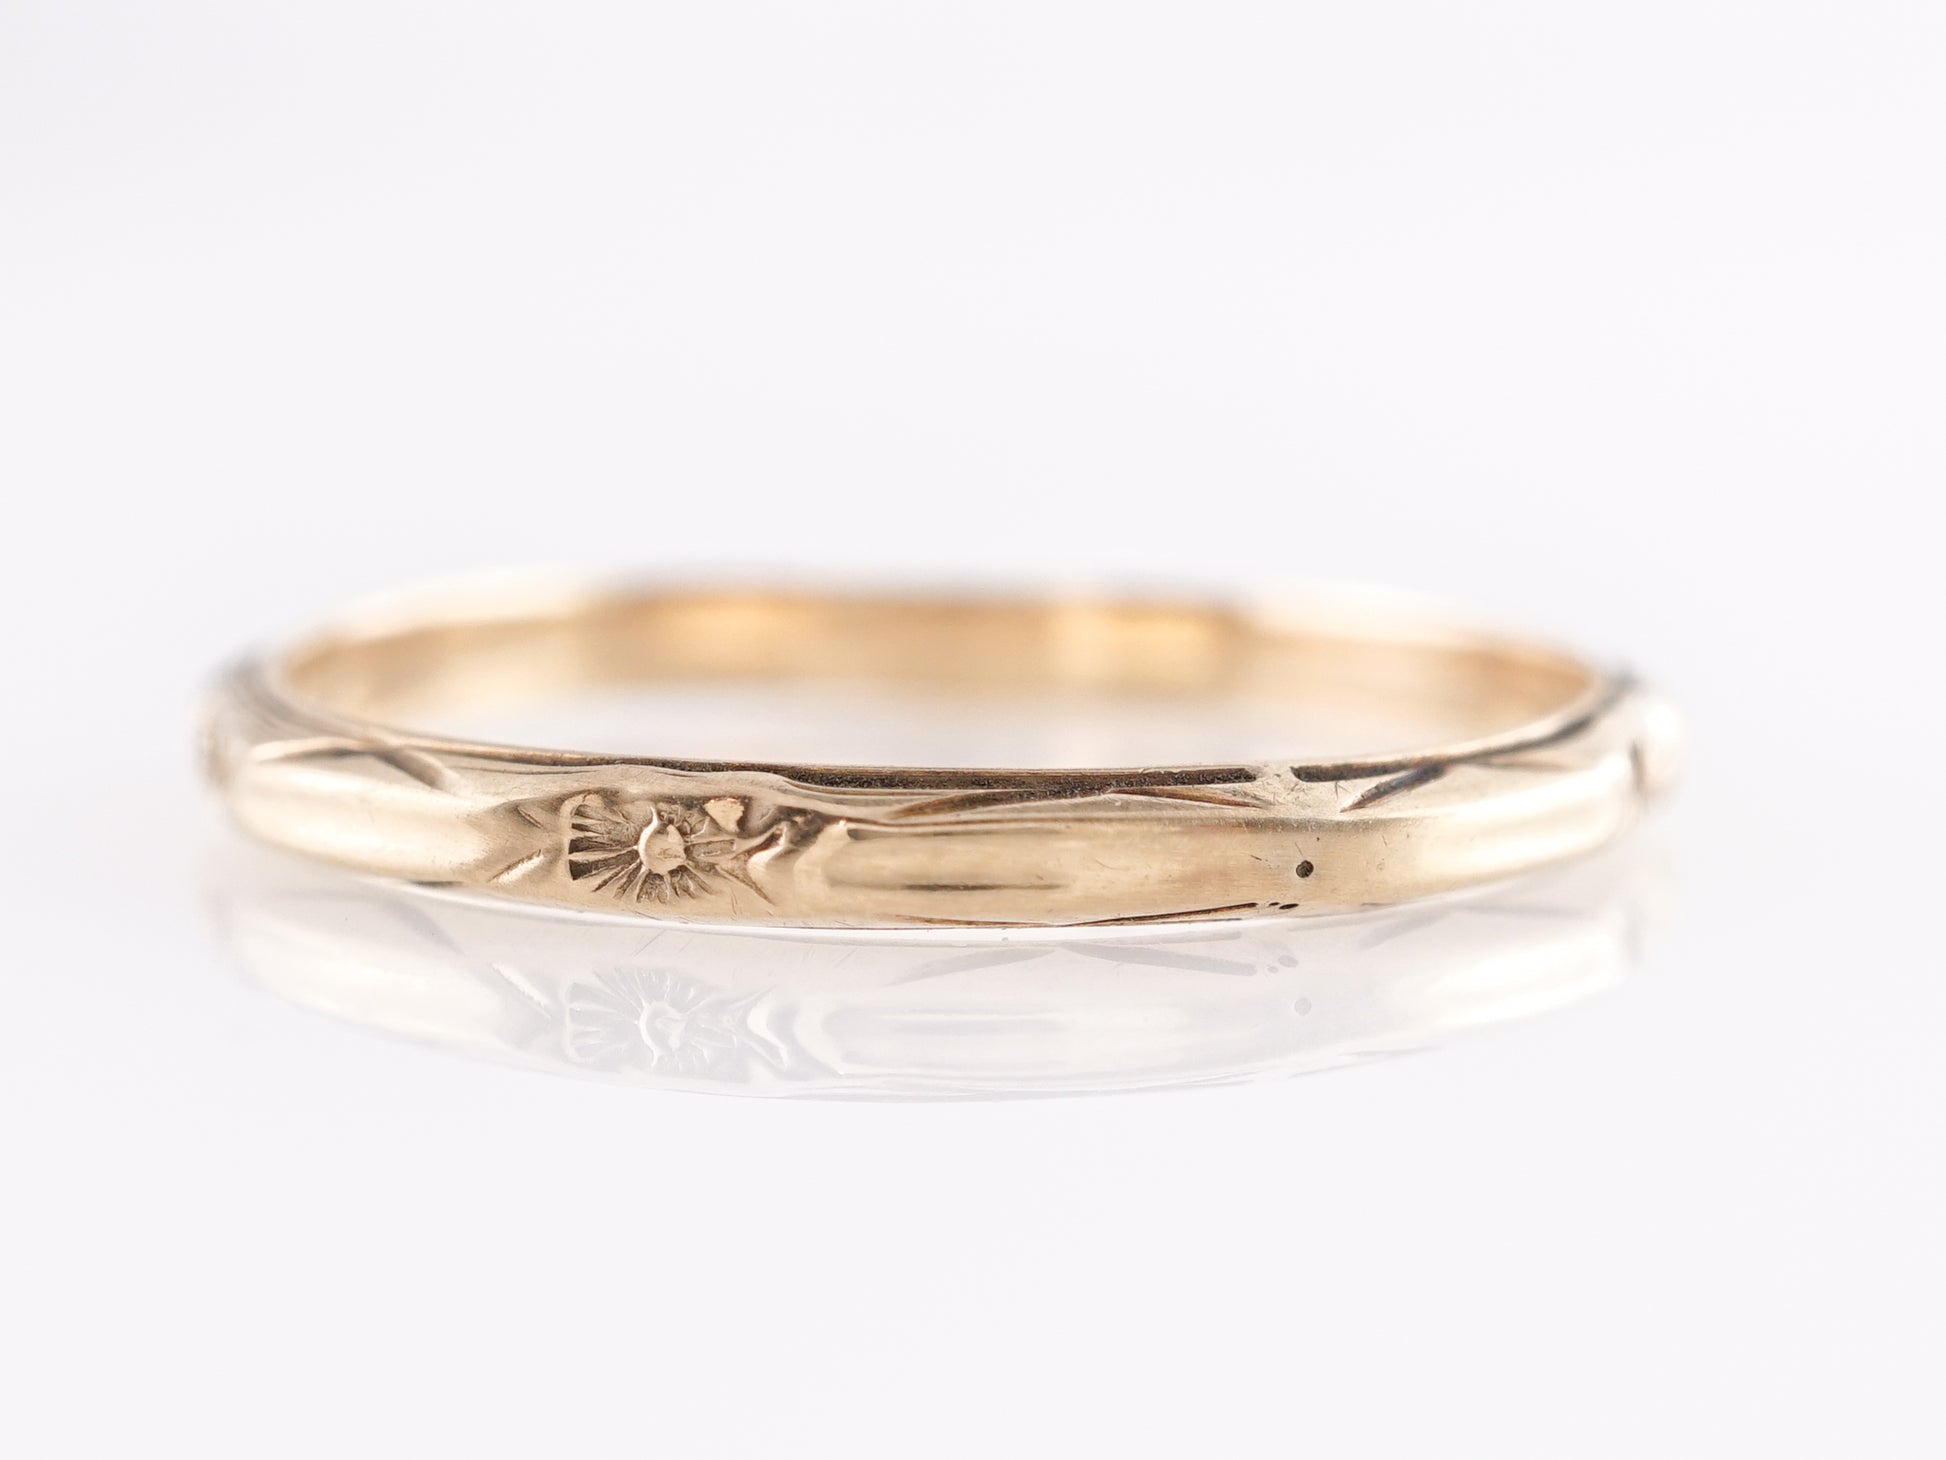 Antique Yellow Gold Orange Blossom Wedding Band in 10kComposition: Platinum Ring Size: 6.5 Total Gram Weight: 1.1 g Inscription: 10k
      